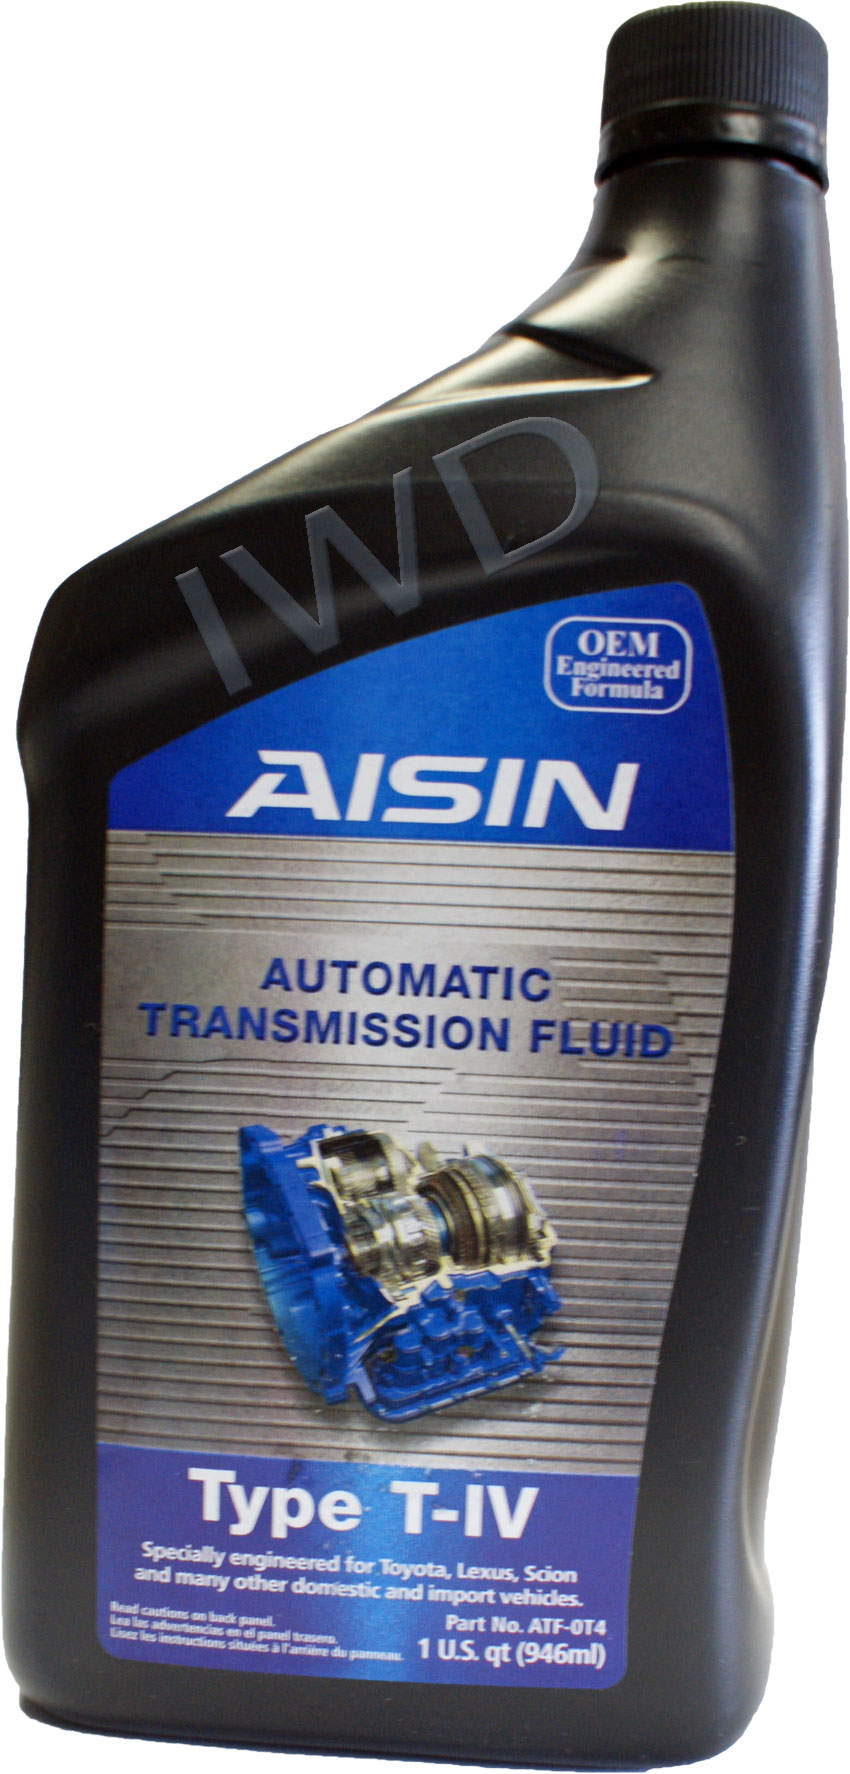 toyota automatic transmission fluid part number #2